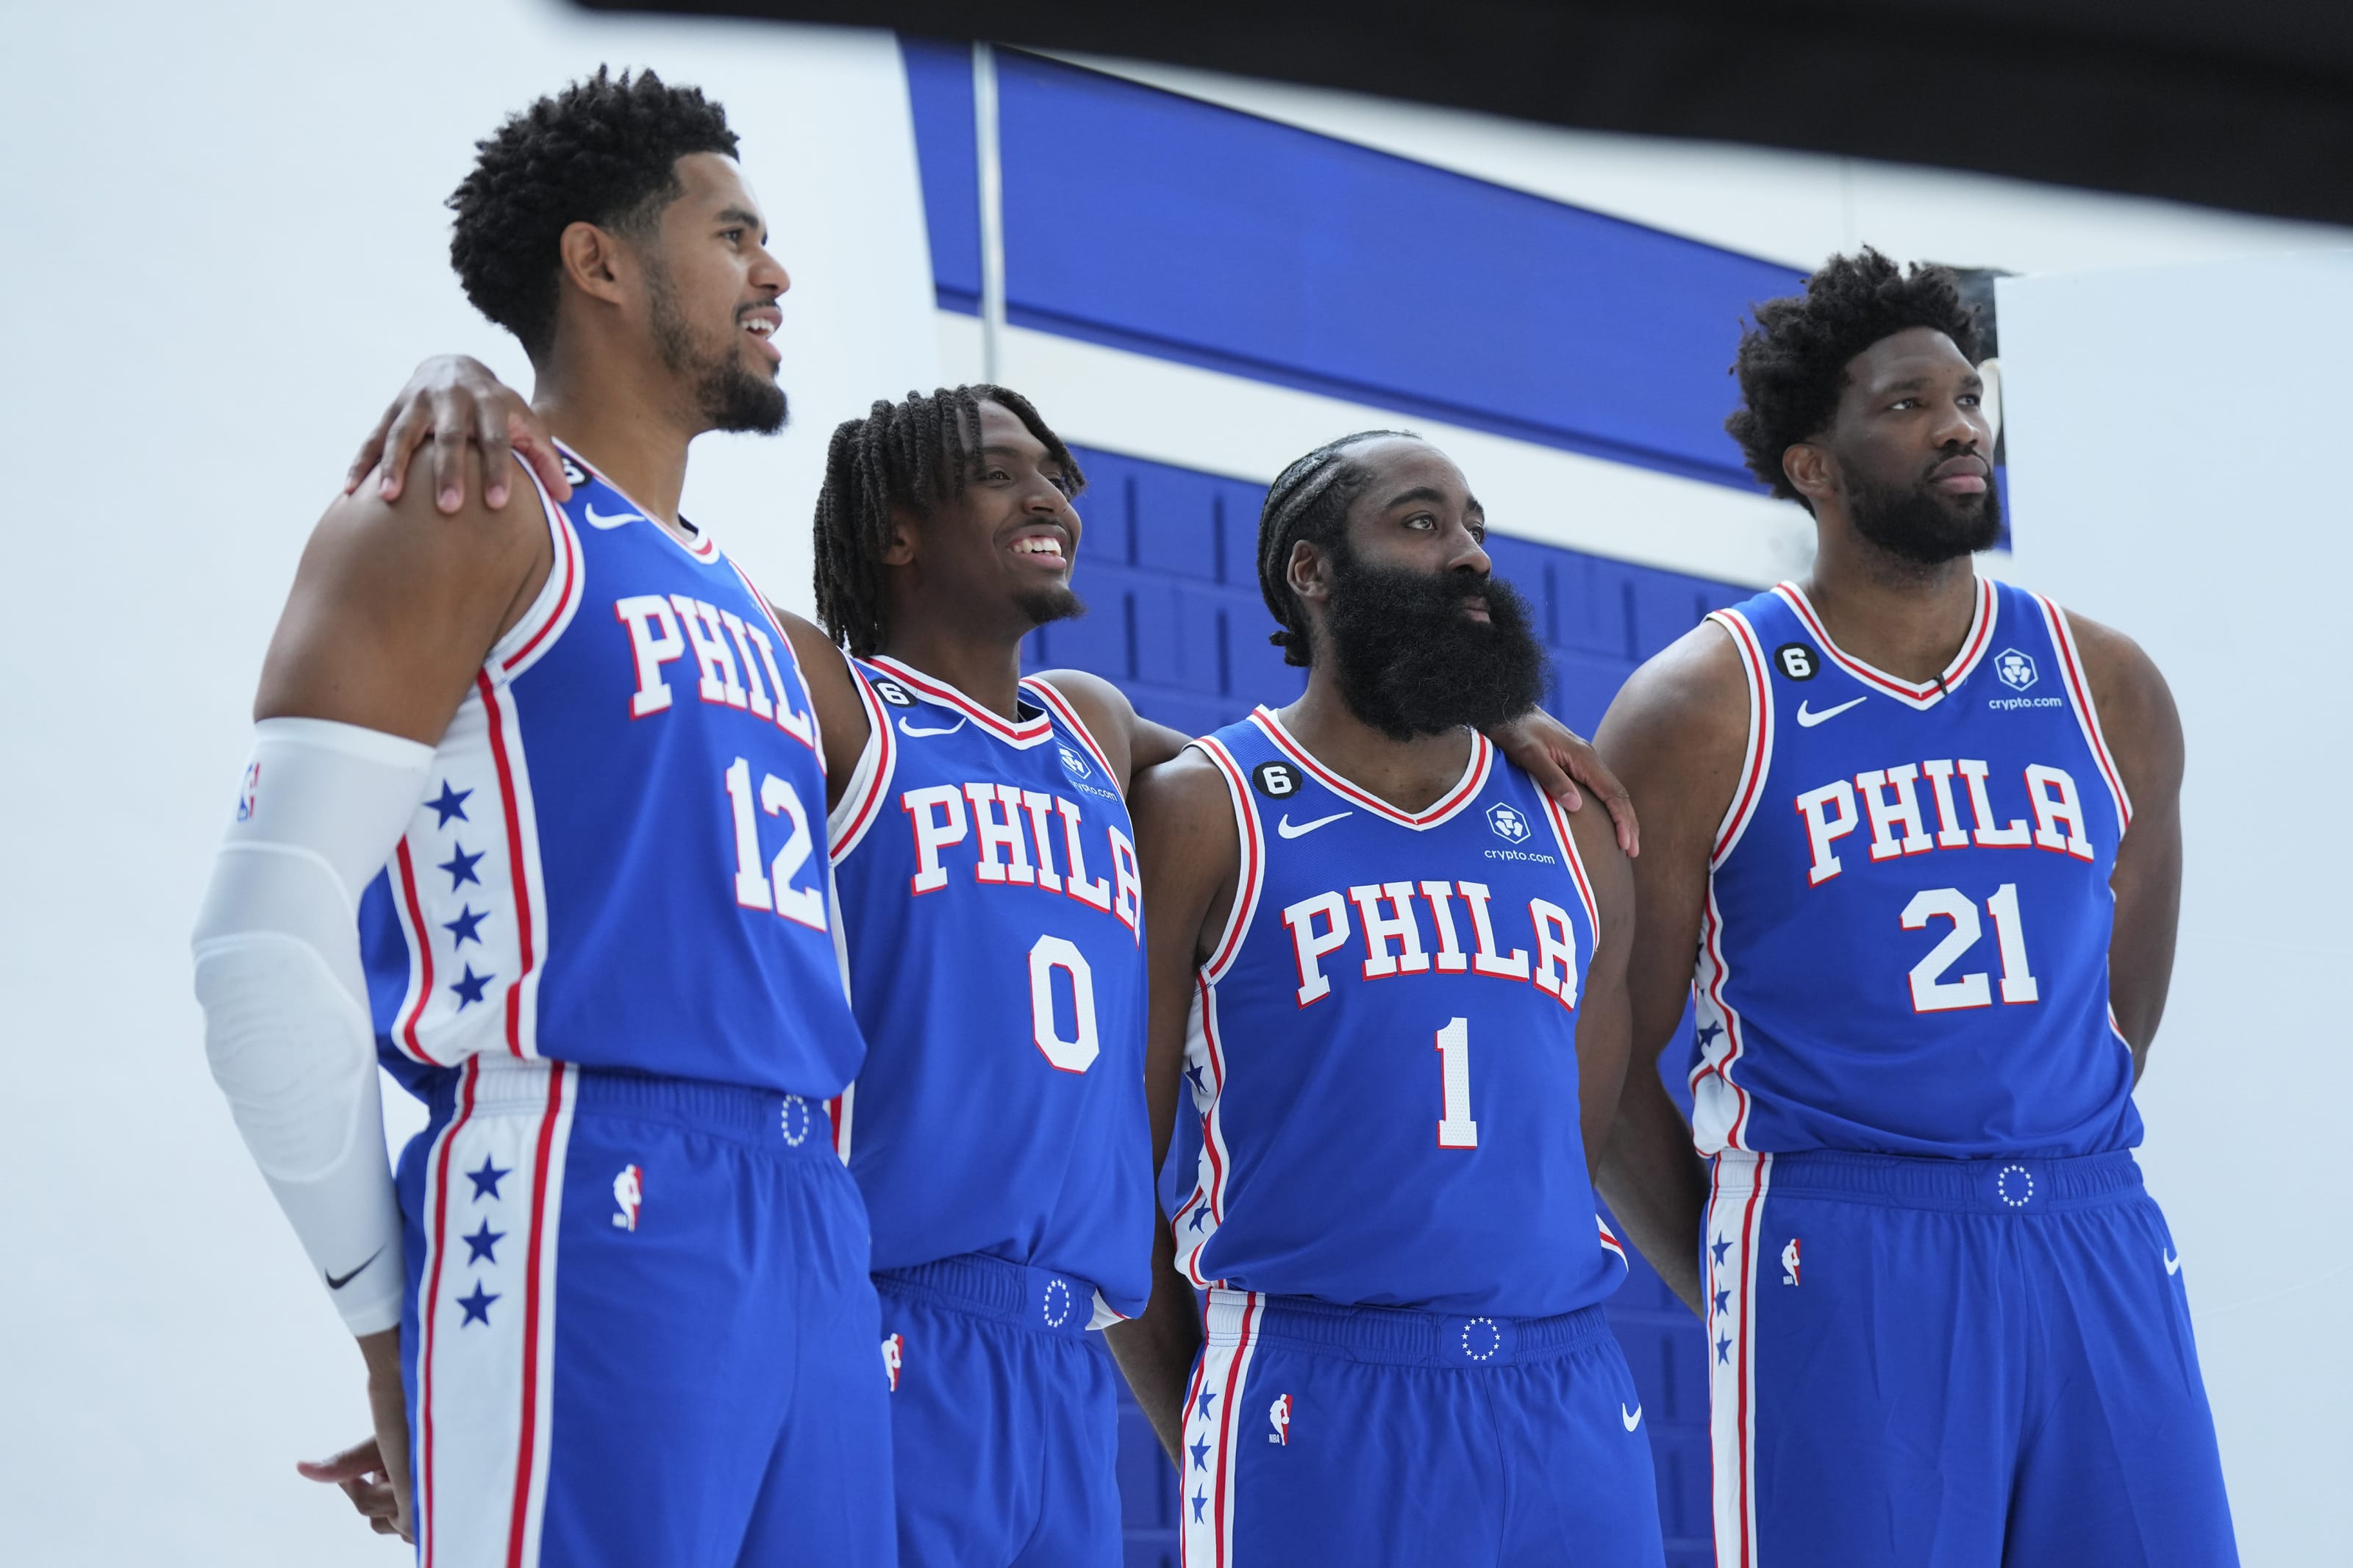 MMH NBA Power Rankings: October 2021 Edition - Music Movies & Hoops